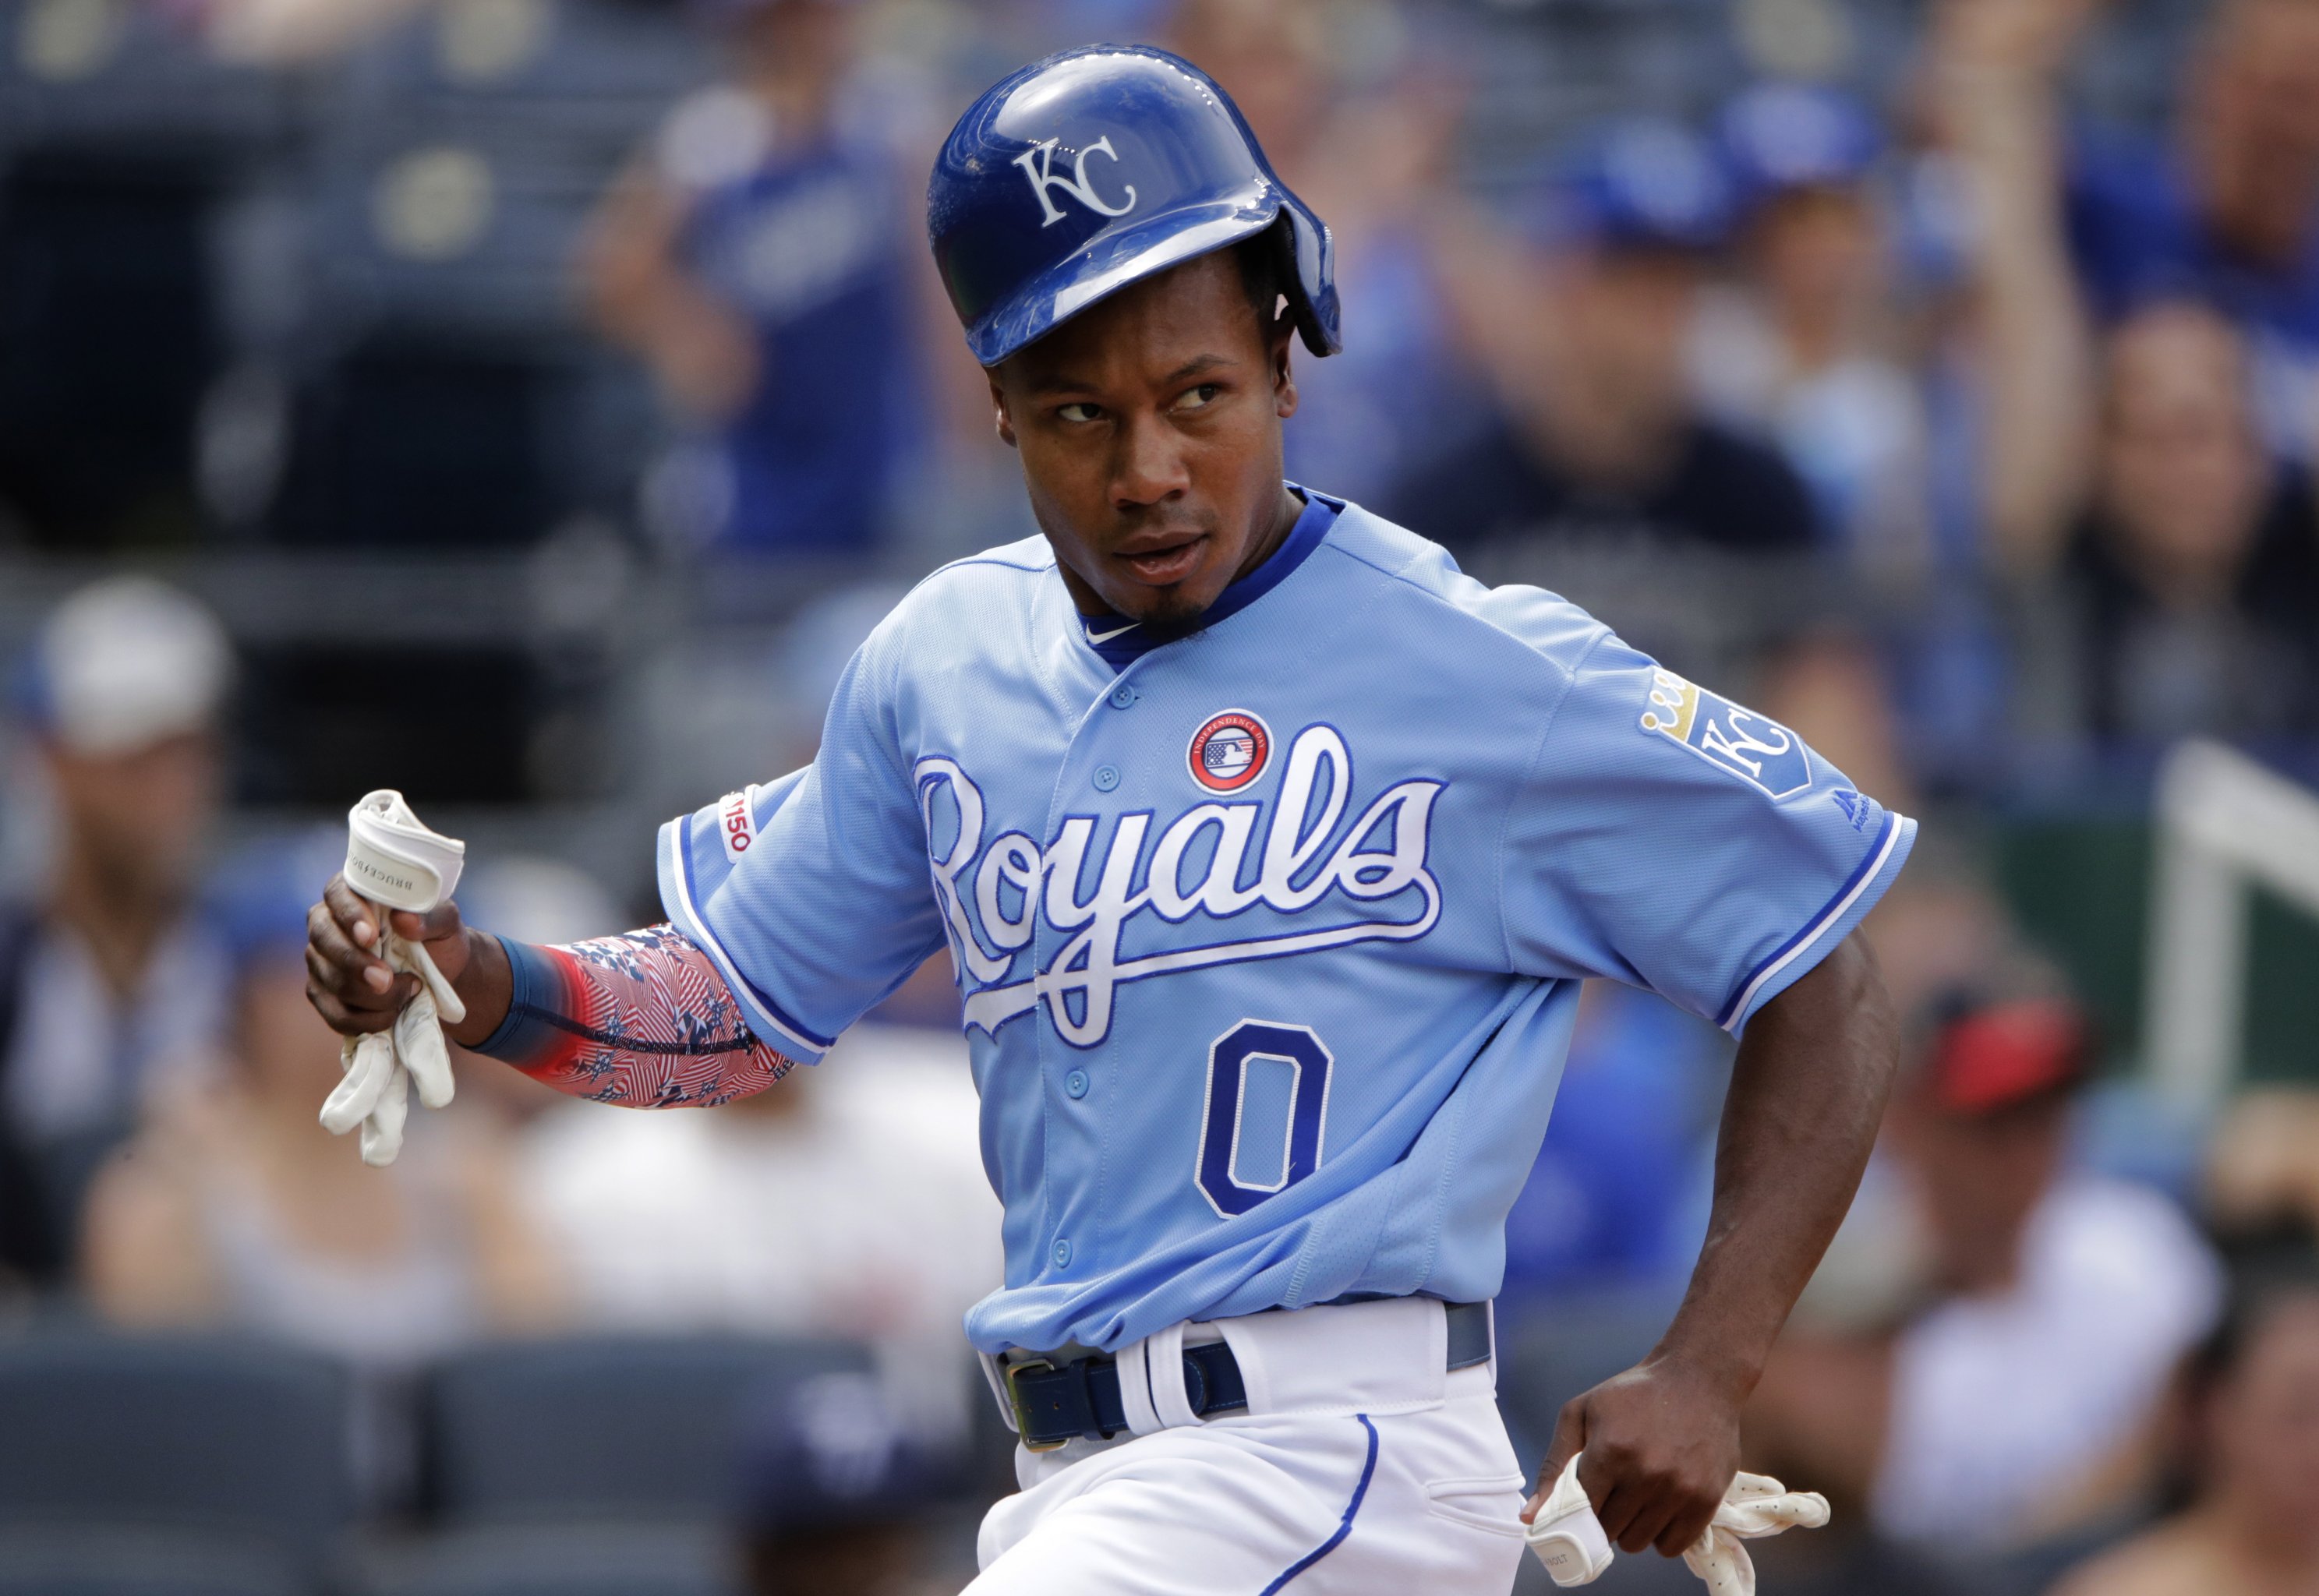 Terrance Gore is MLB's base stealer for hire